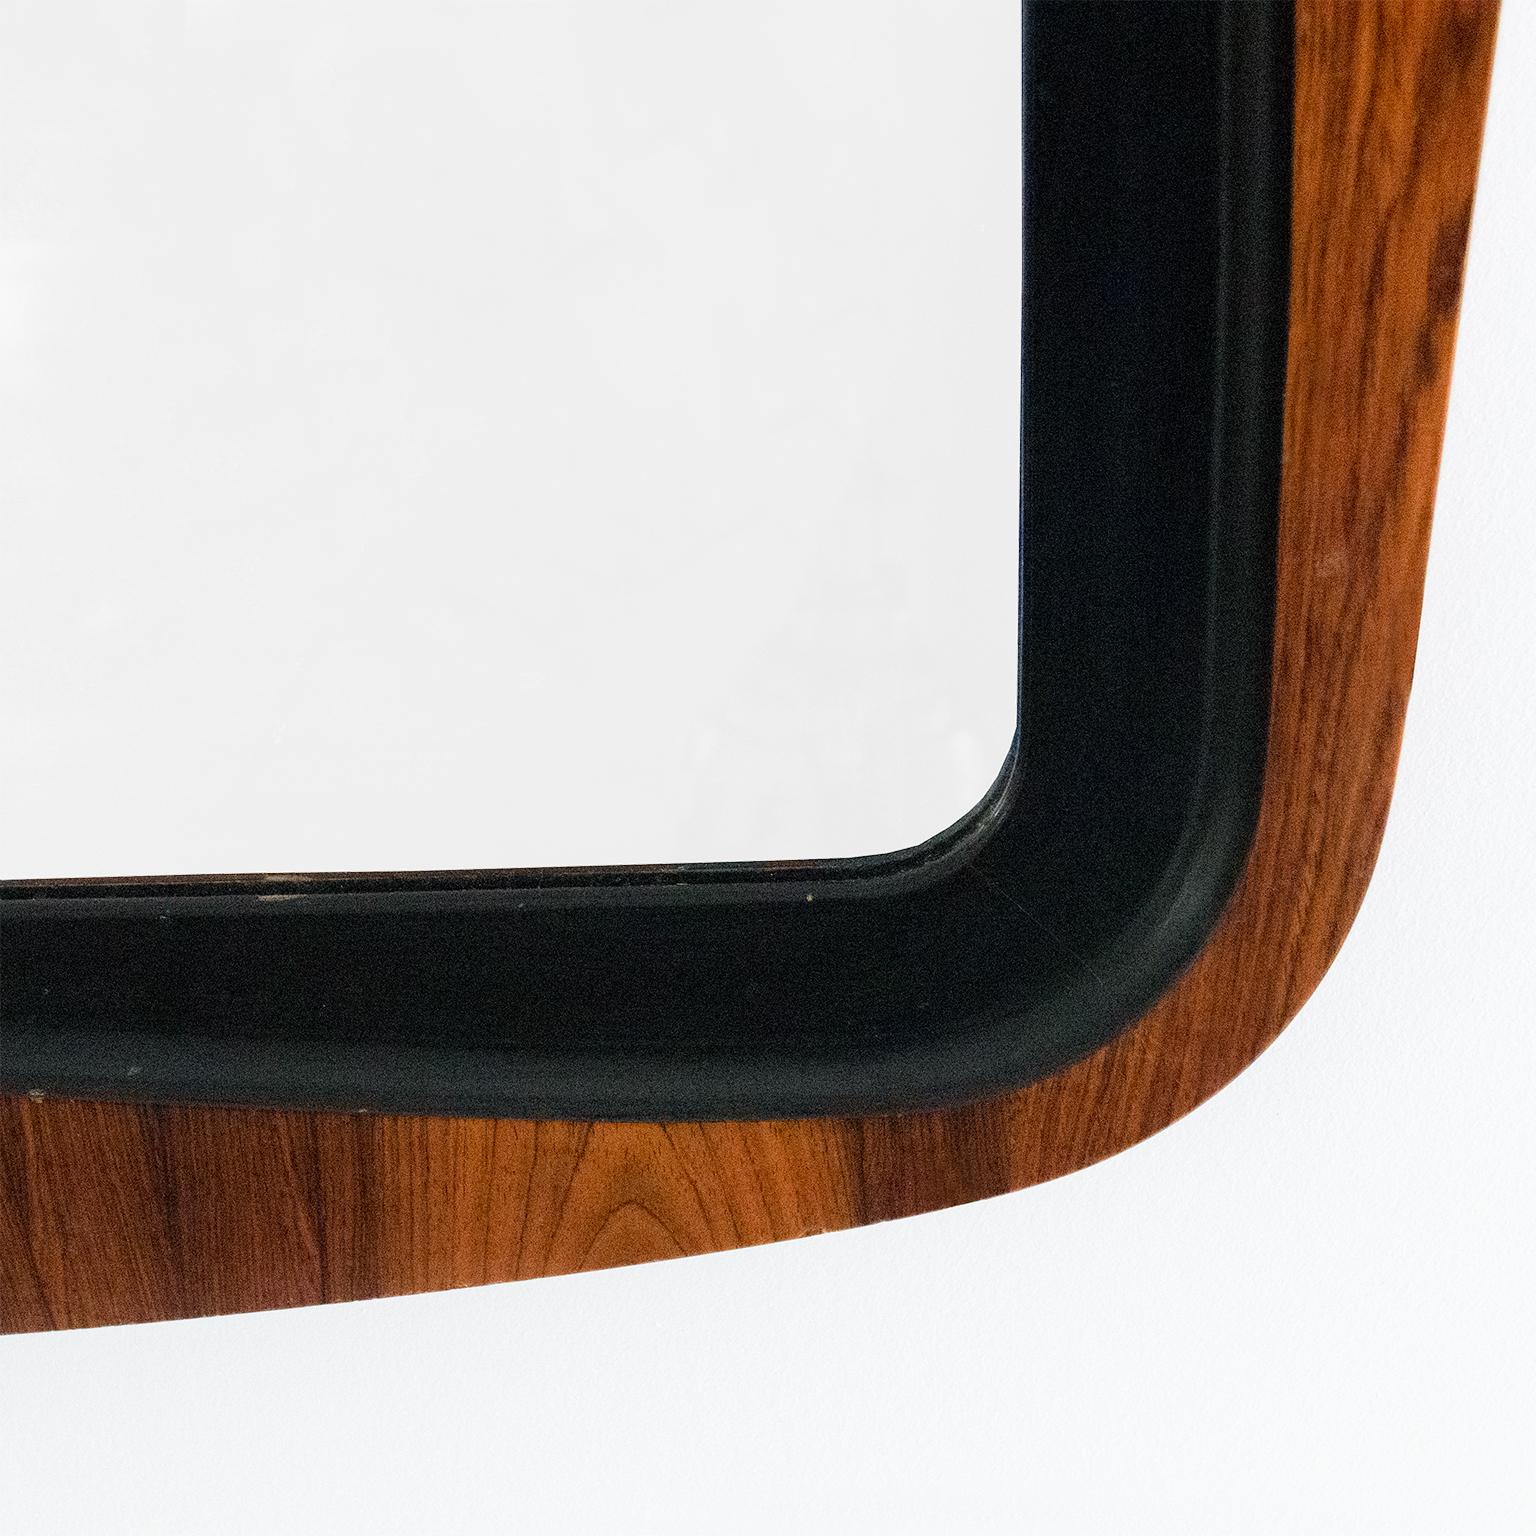 20th Century Swedish asymetrical rosewood wall mirror from Glas & Trä, Hovemantorp, Sweden For Sale